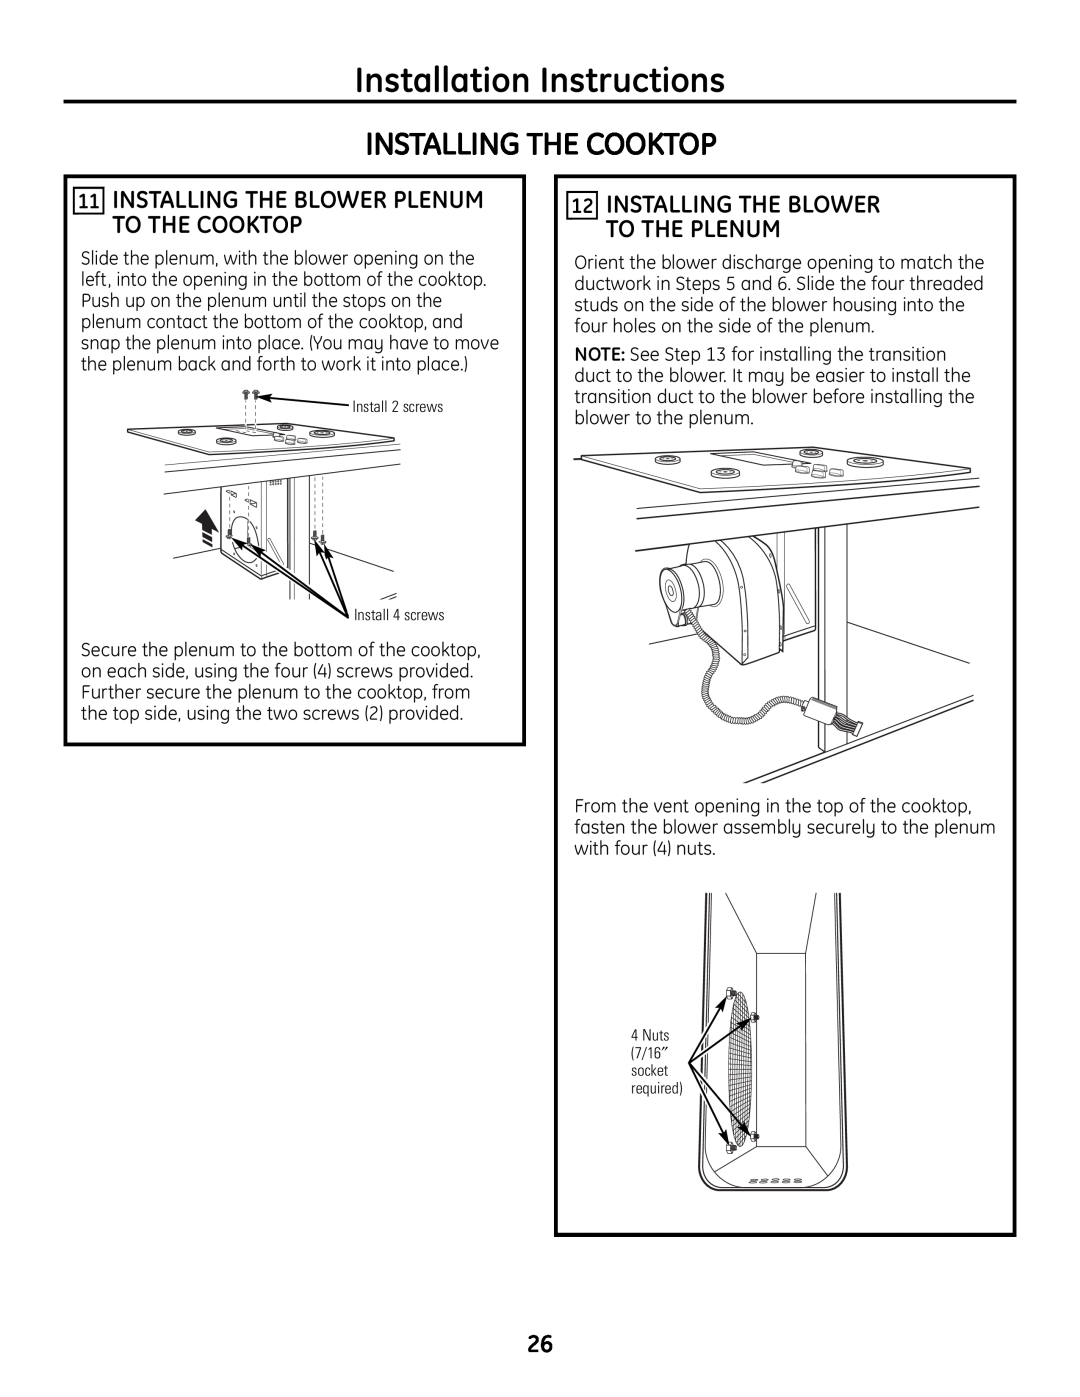 GE PGP989 manual Installation Instructions, Installing The Cooktop, 11INSTALLING THE BLOWER PLENUM TO THE COOKTOP 